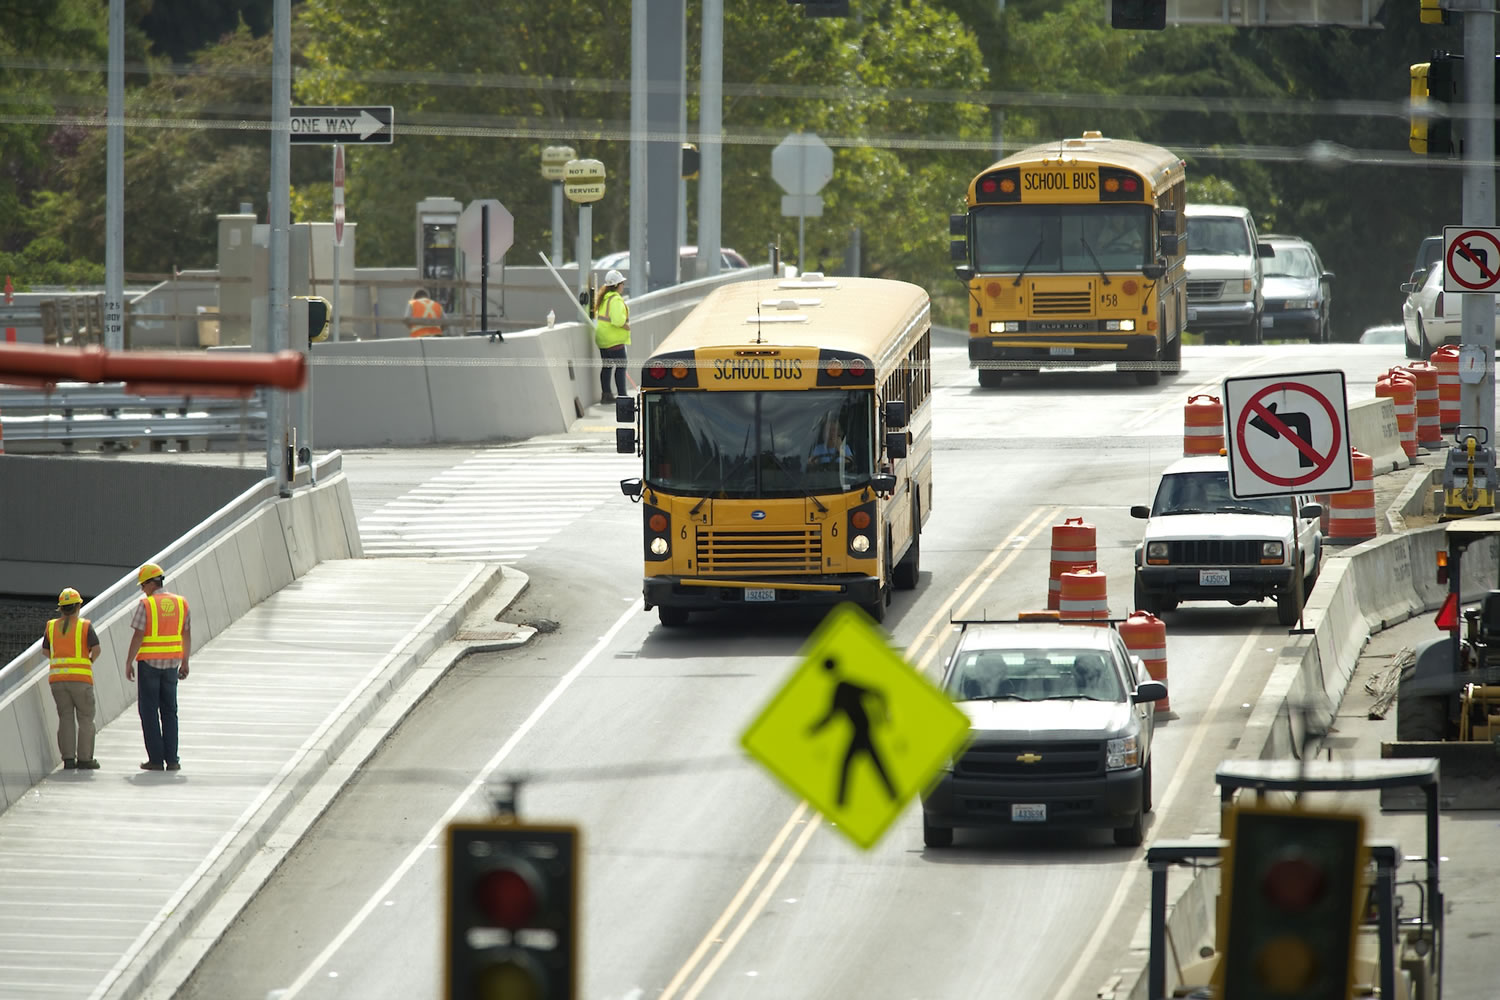 School buses and other traffic travel over the SR 500/St. Johns Blvd interchange Monday in Vancouver as the road construction project nears completion.